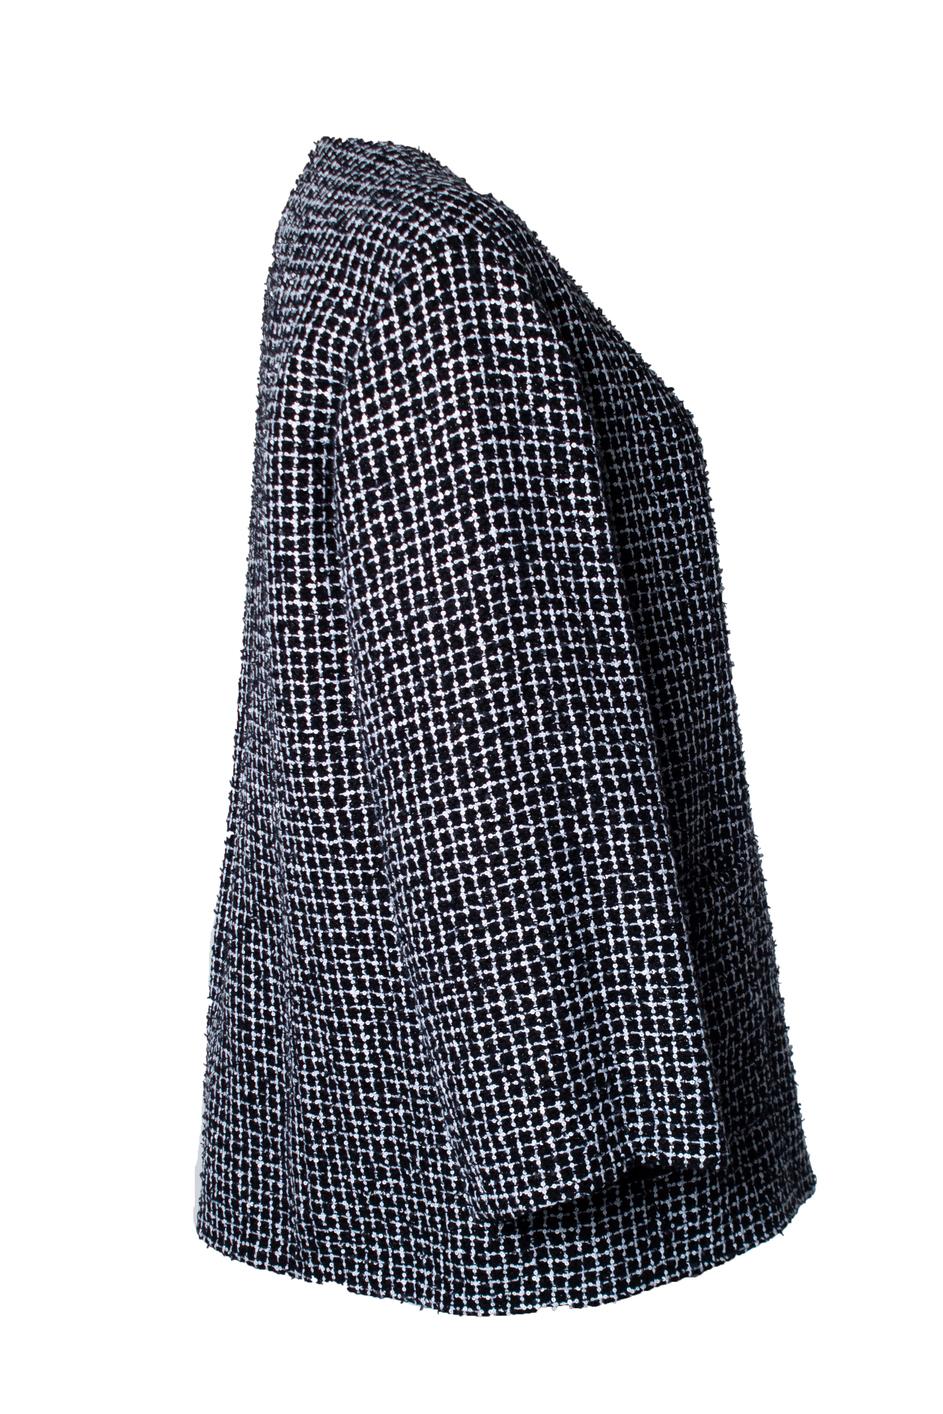 Chanel, 23C Tweed jacket in black and white 1